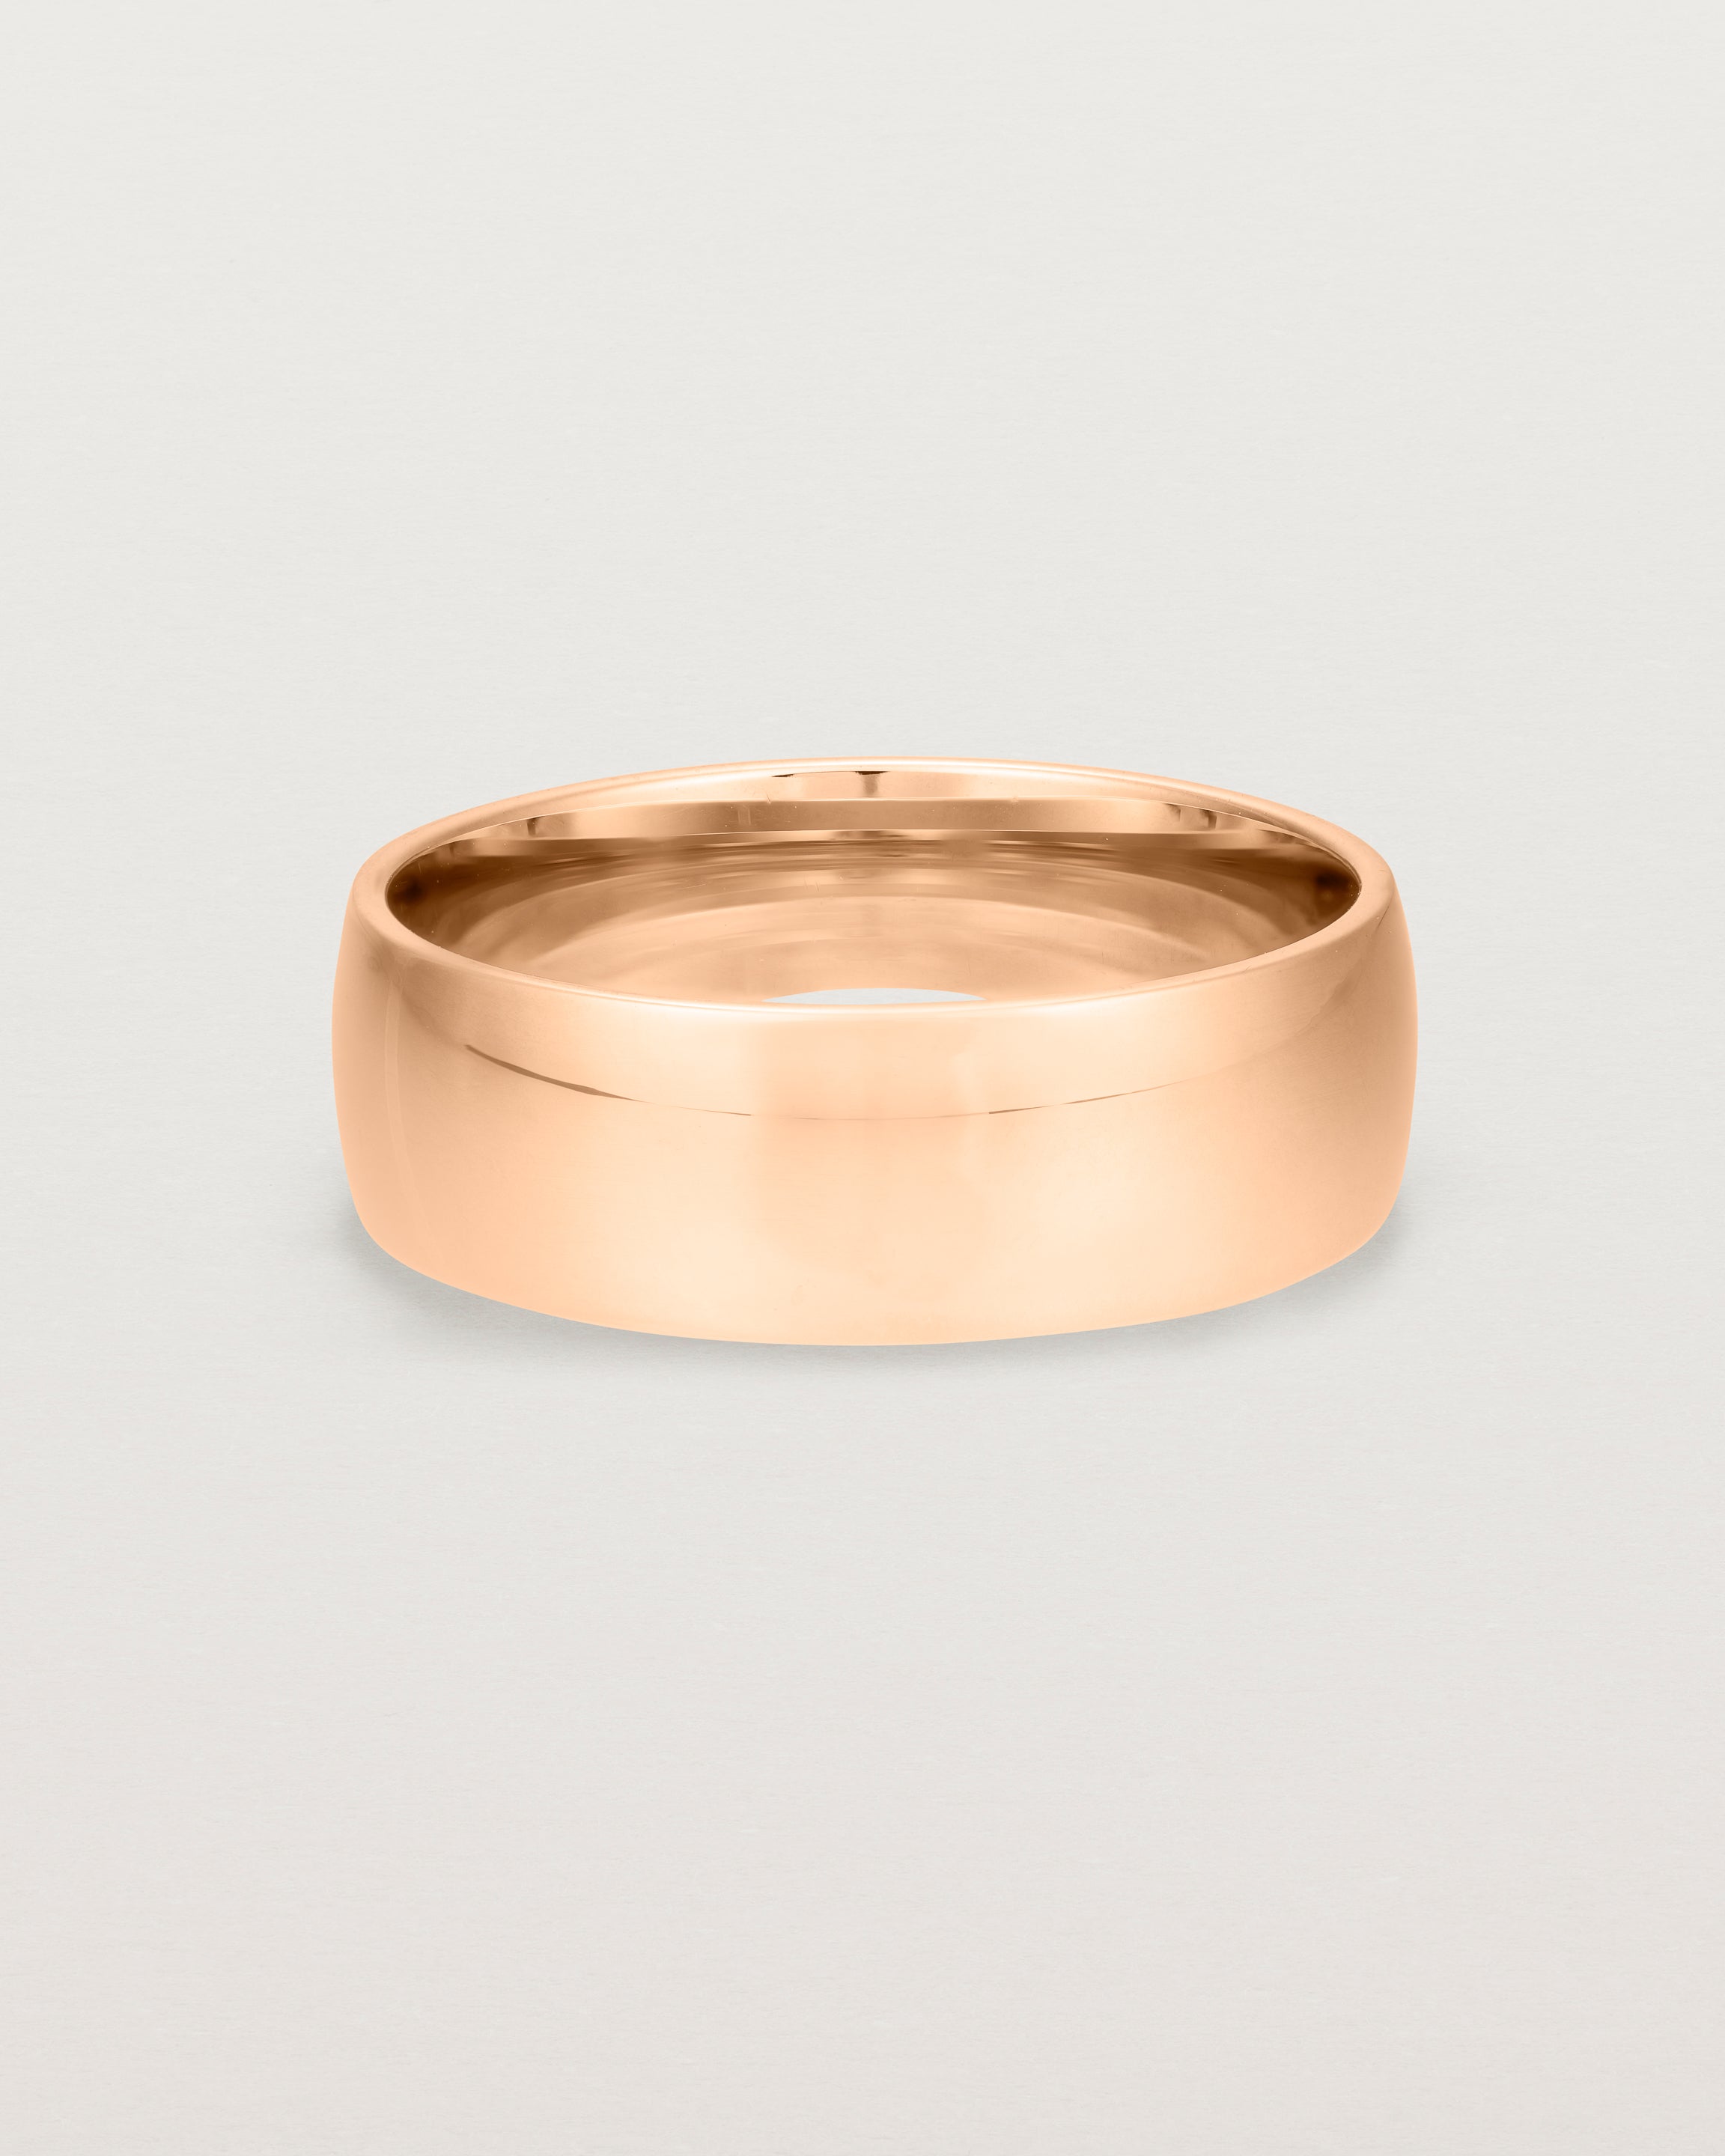 The front view of a heavy 7mm wedding band in rose gold